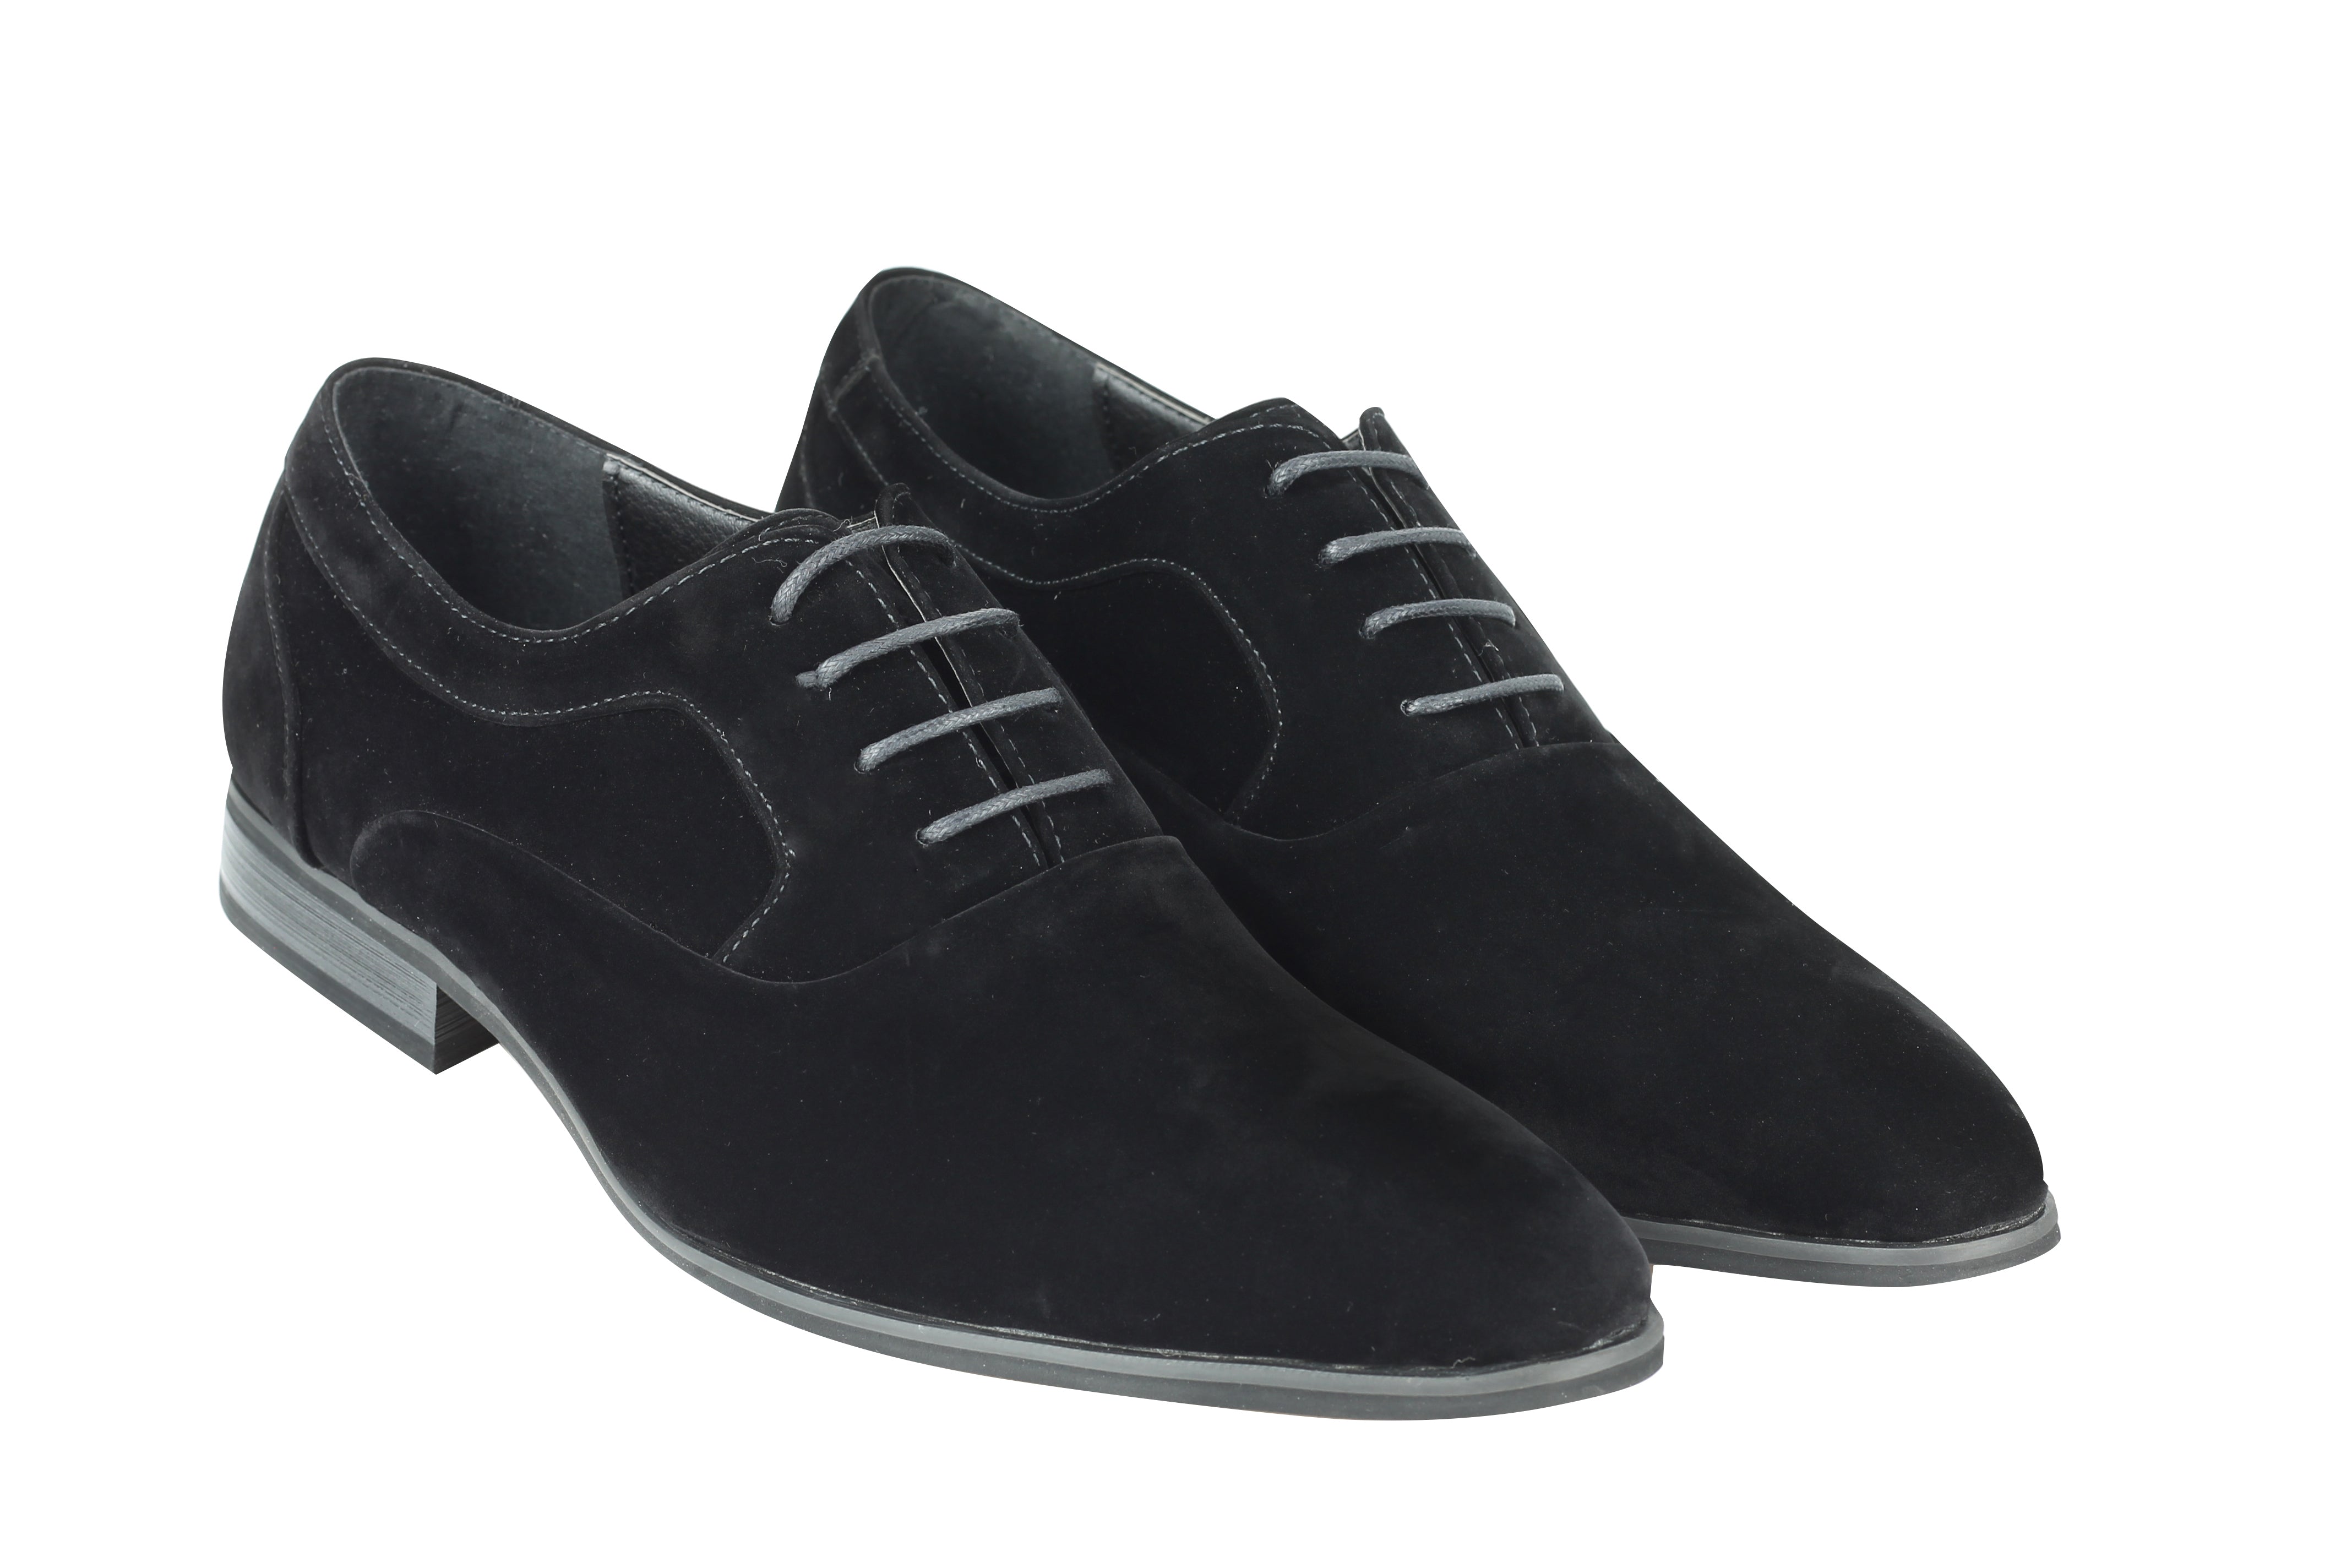 Black Suede Leather Lace Ups Shoes